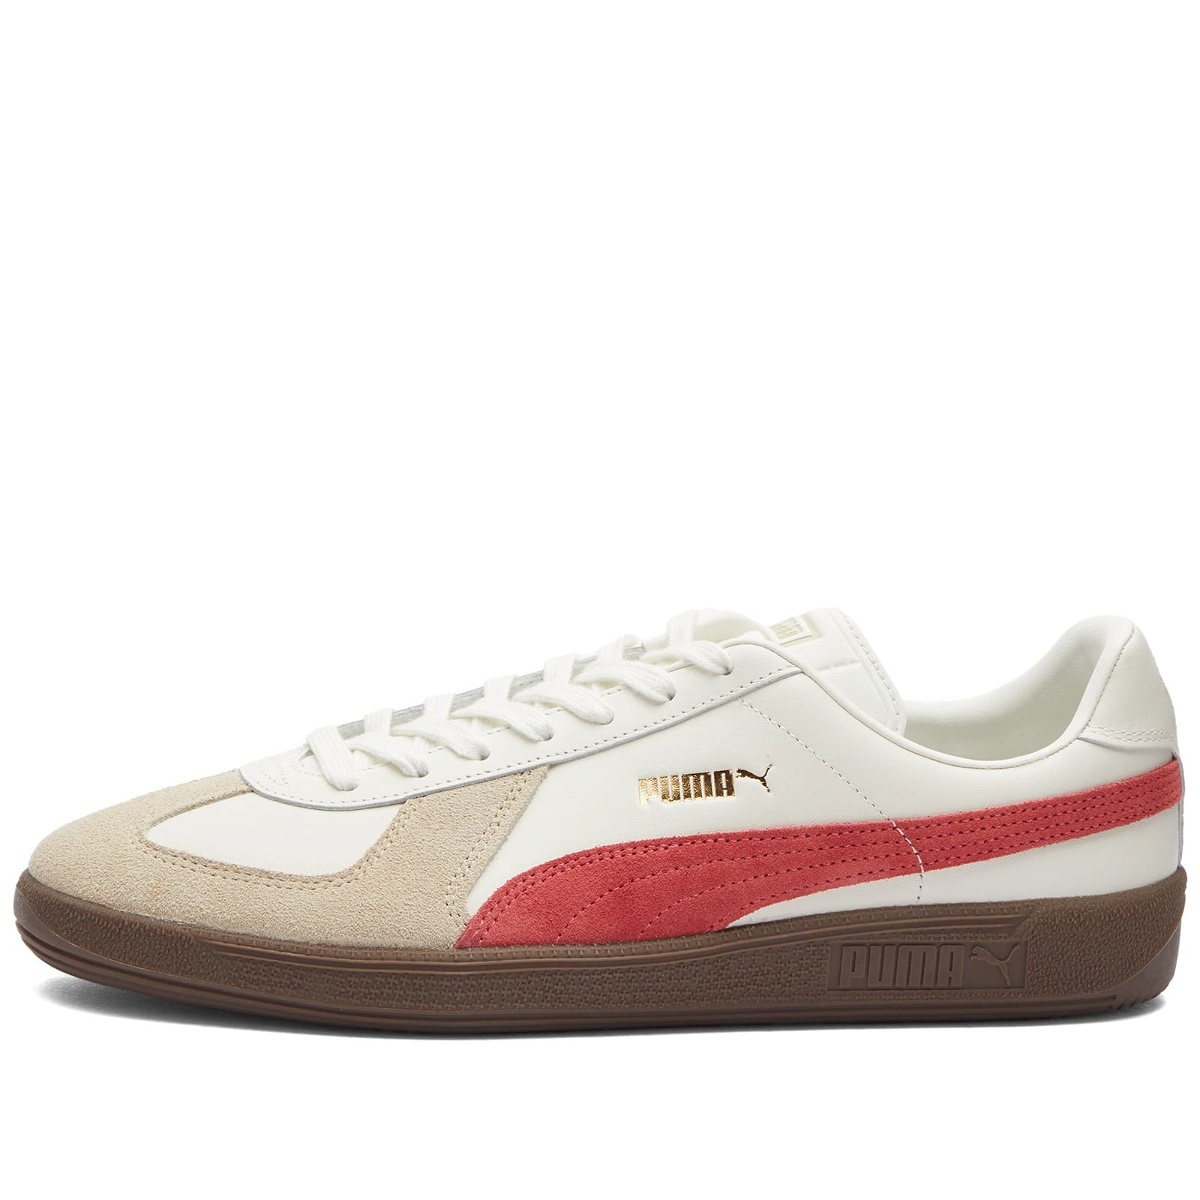 Puma Suede Classic Xxi Shoe in Red | Red Rat-thephaco.com.vn